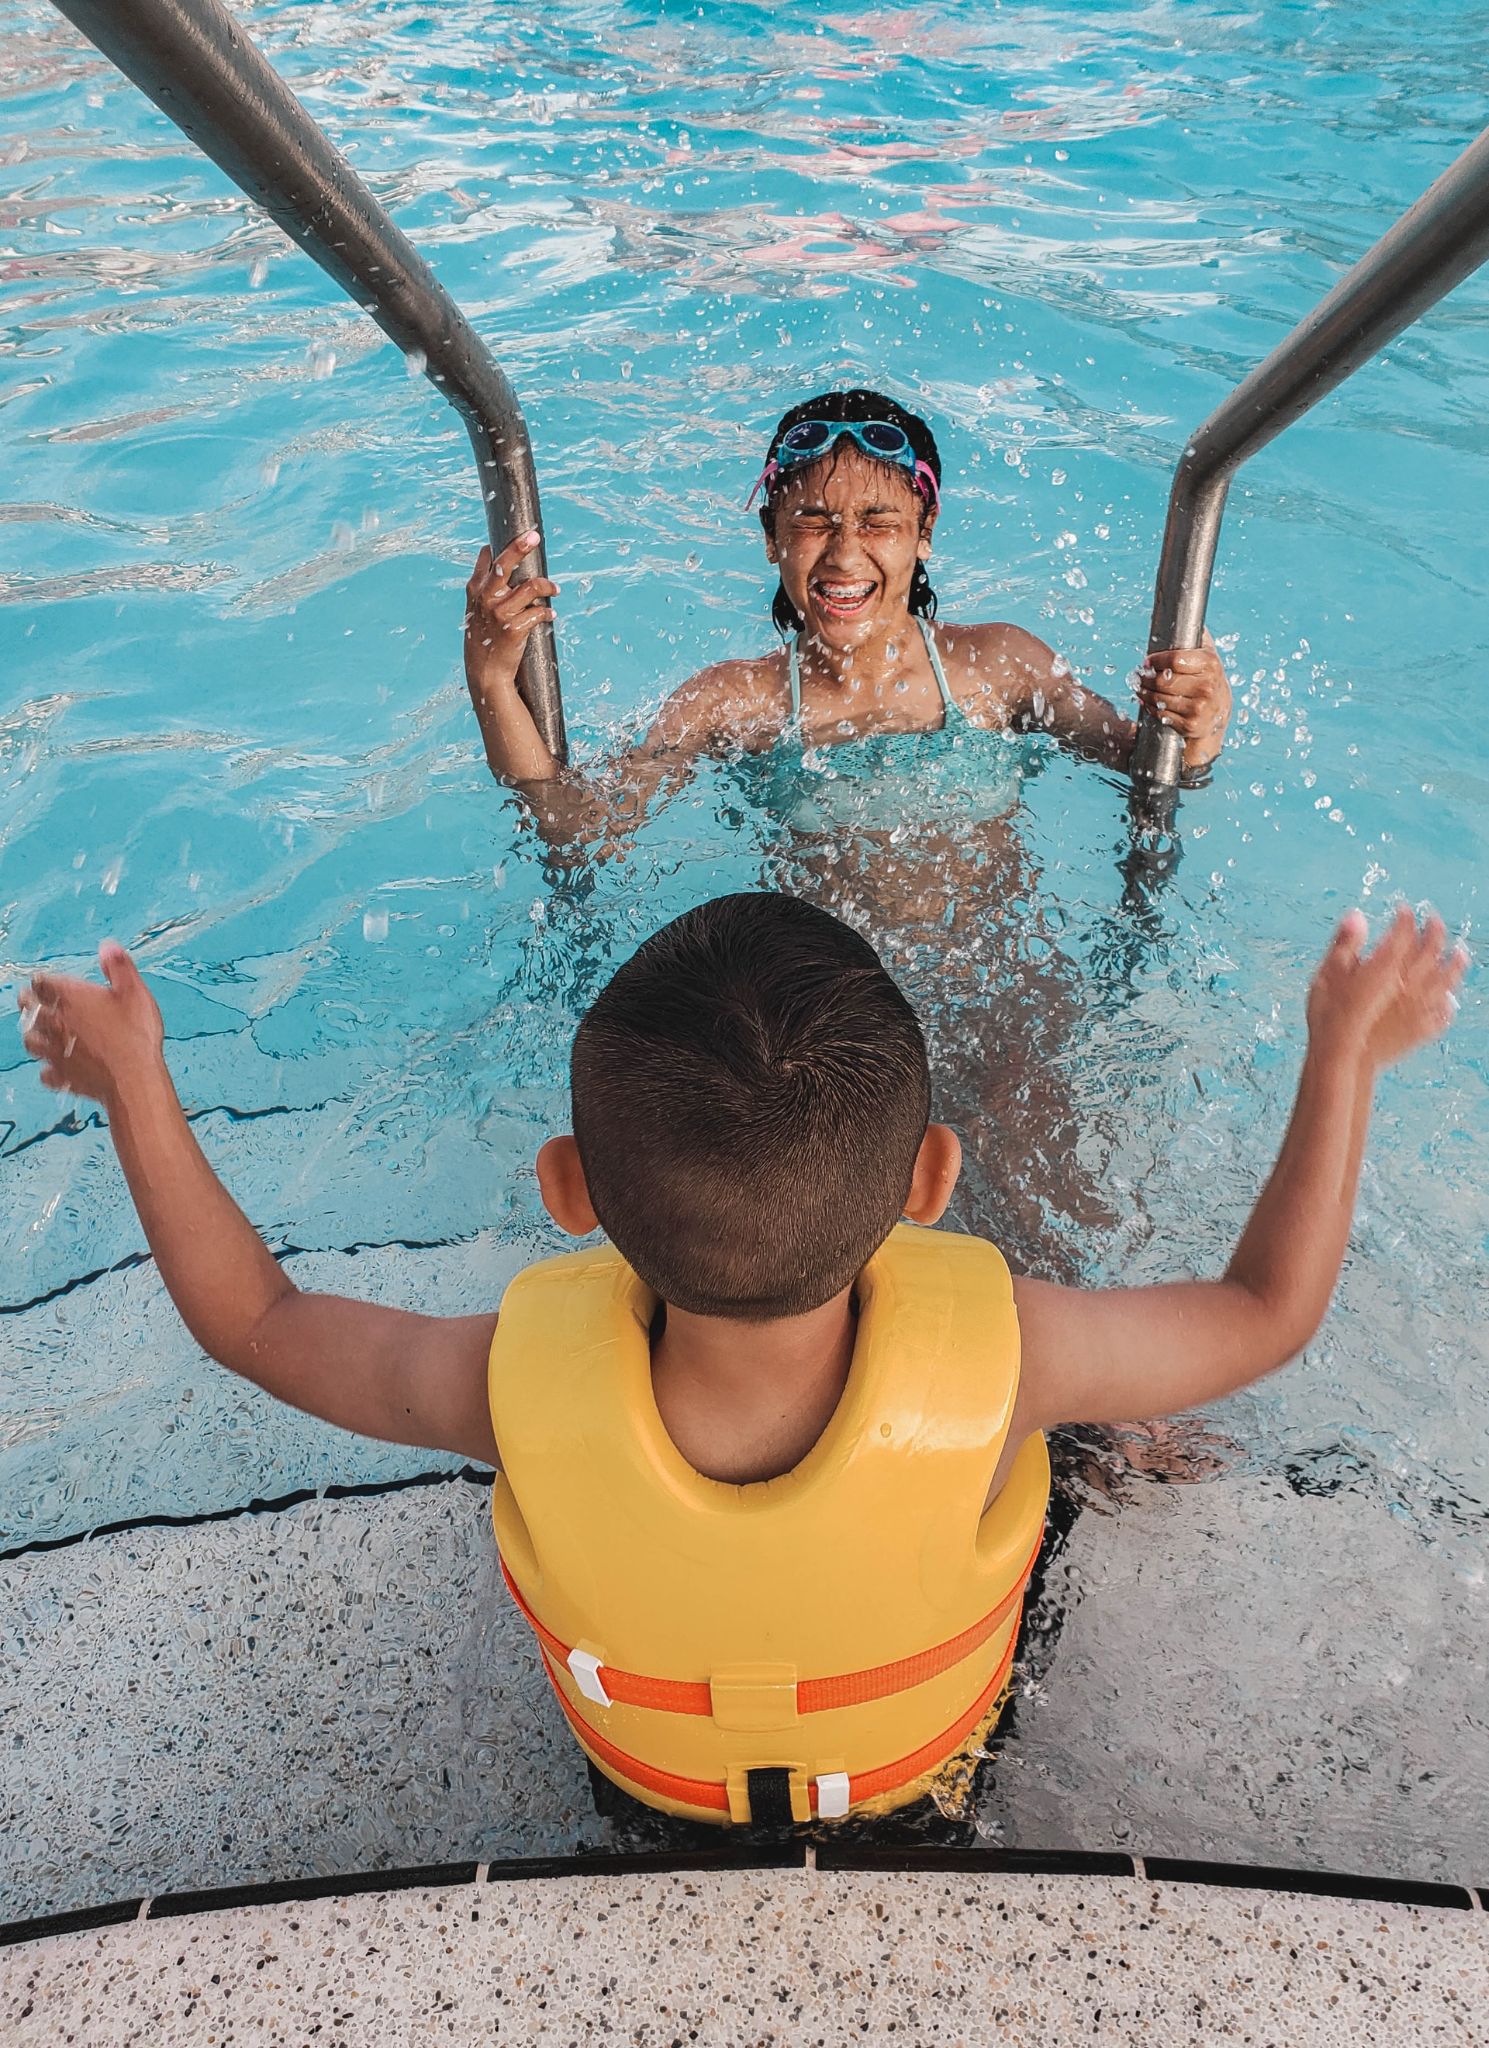 Things to Keep in Mind Before Taking Kids Out for Water Sports